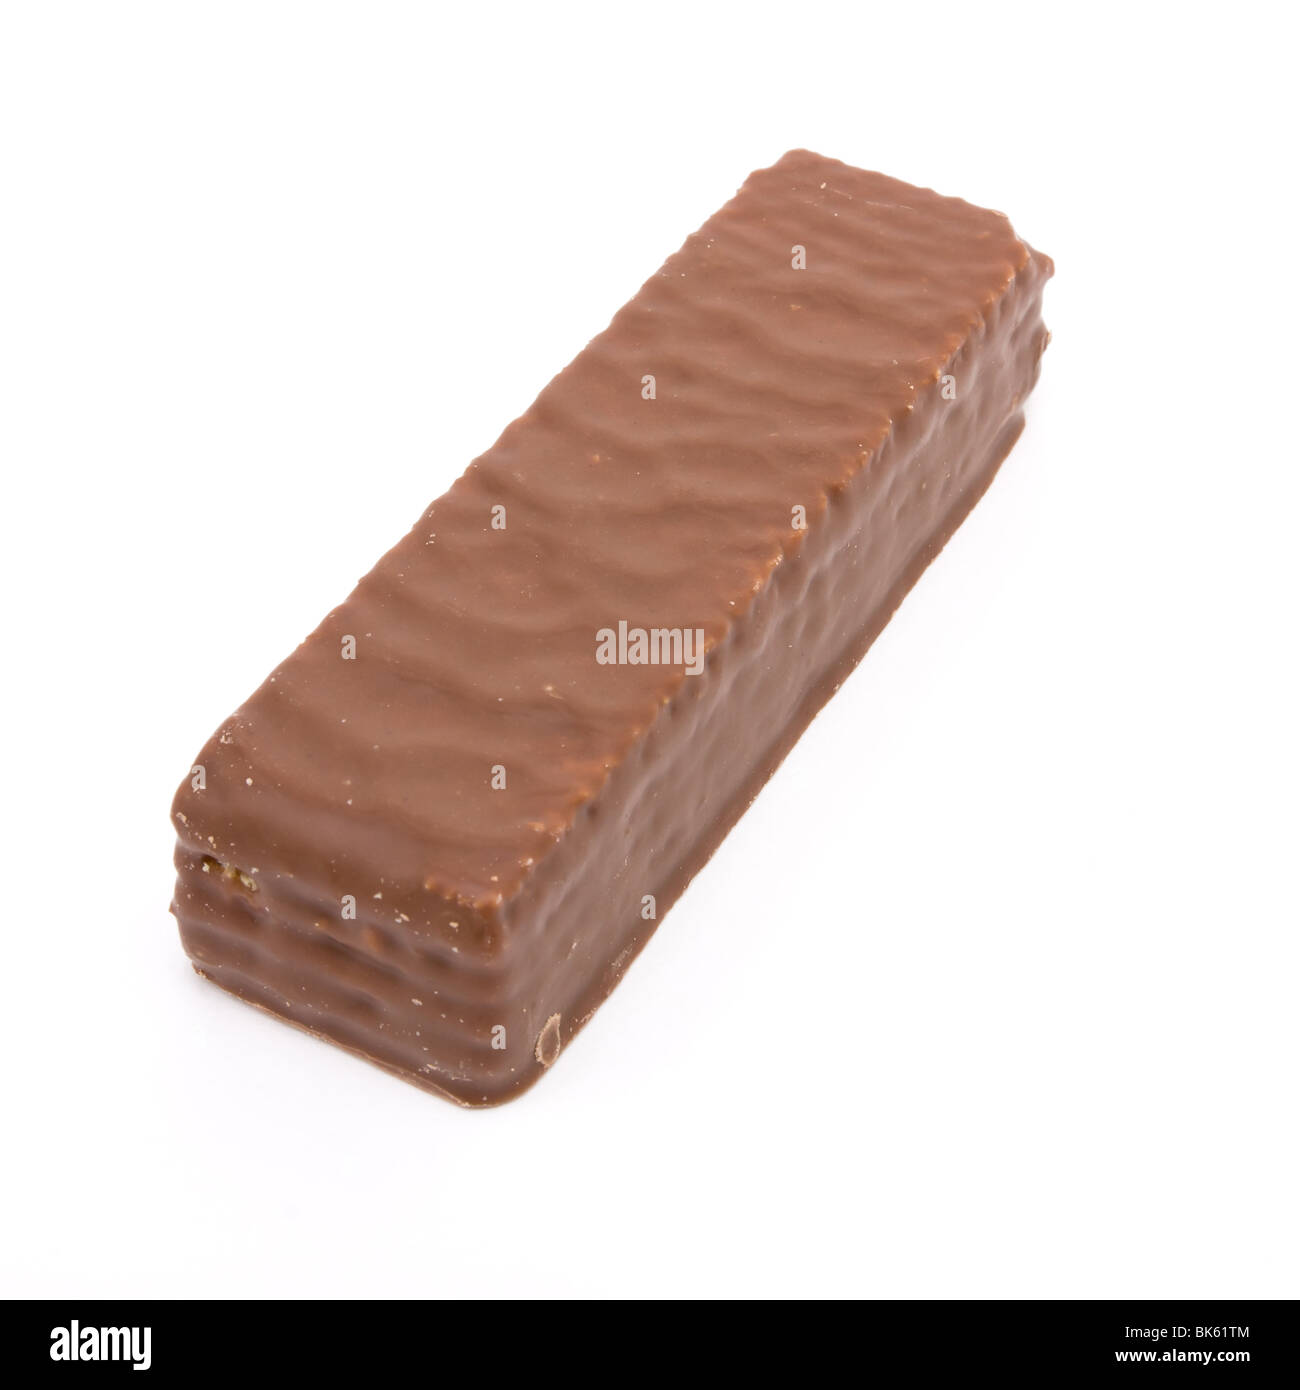 Chocolate covered Wafer biscuit isolated against white background. Stock Photo